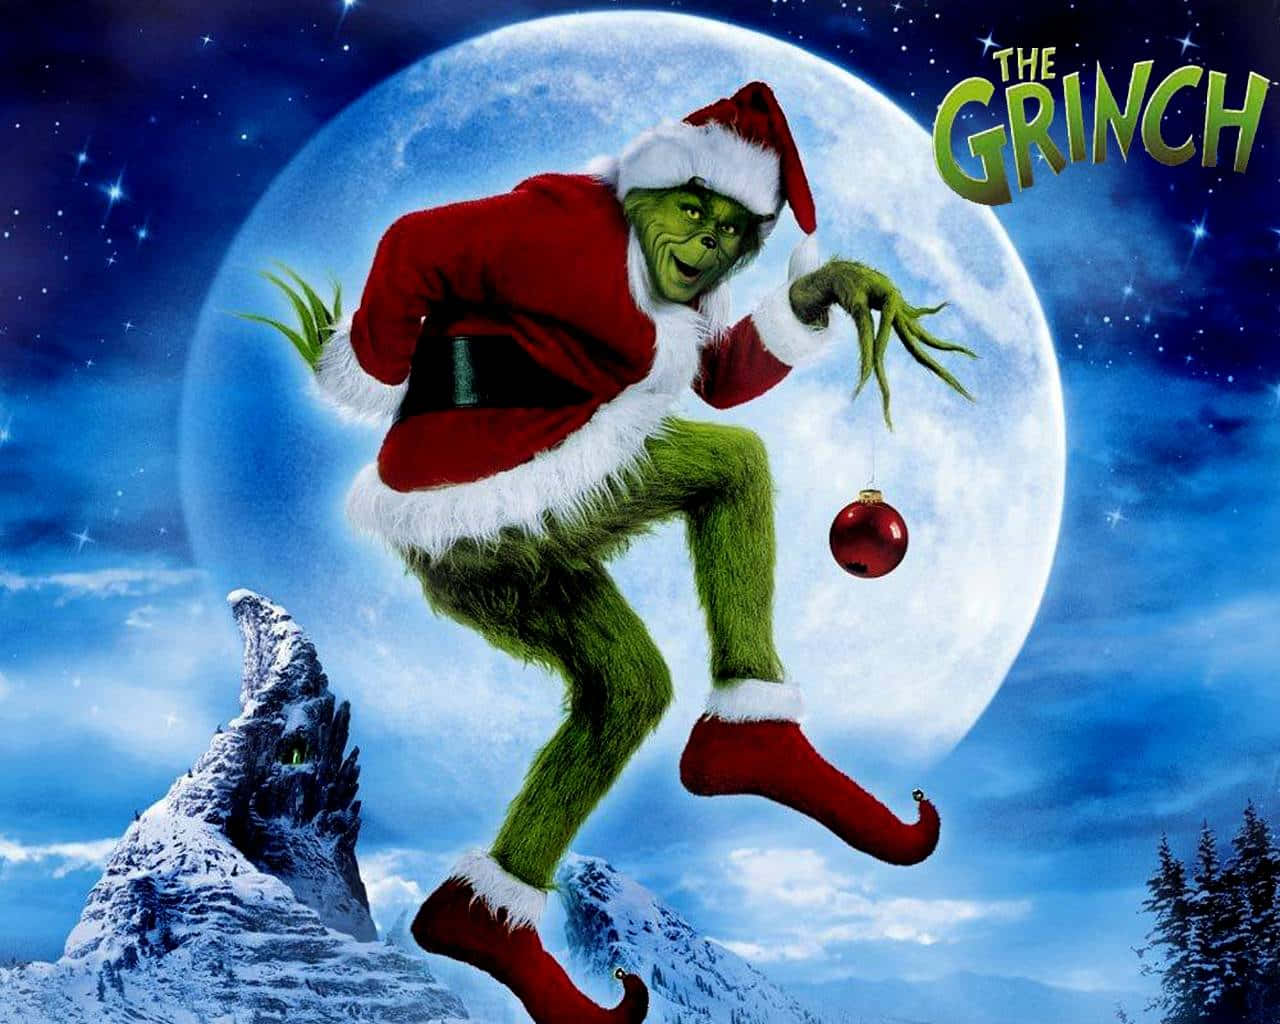 Get Into the Christmas Spirit with the Grinch Wallpaper